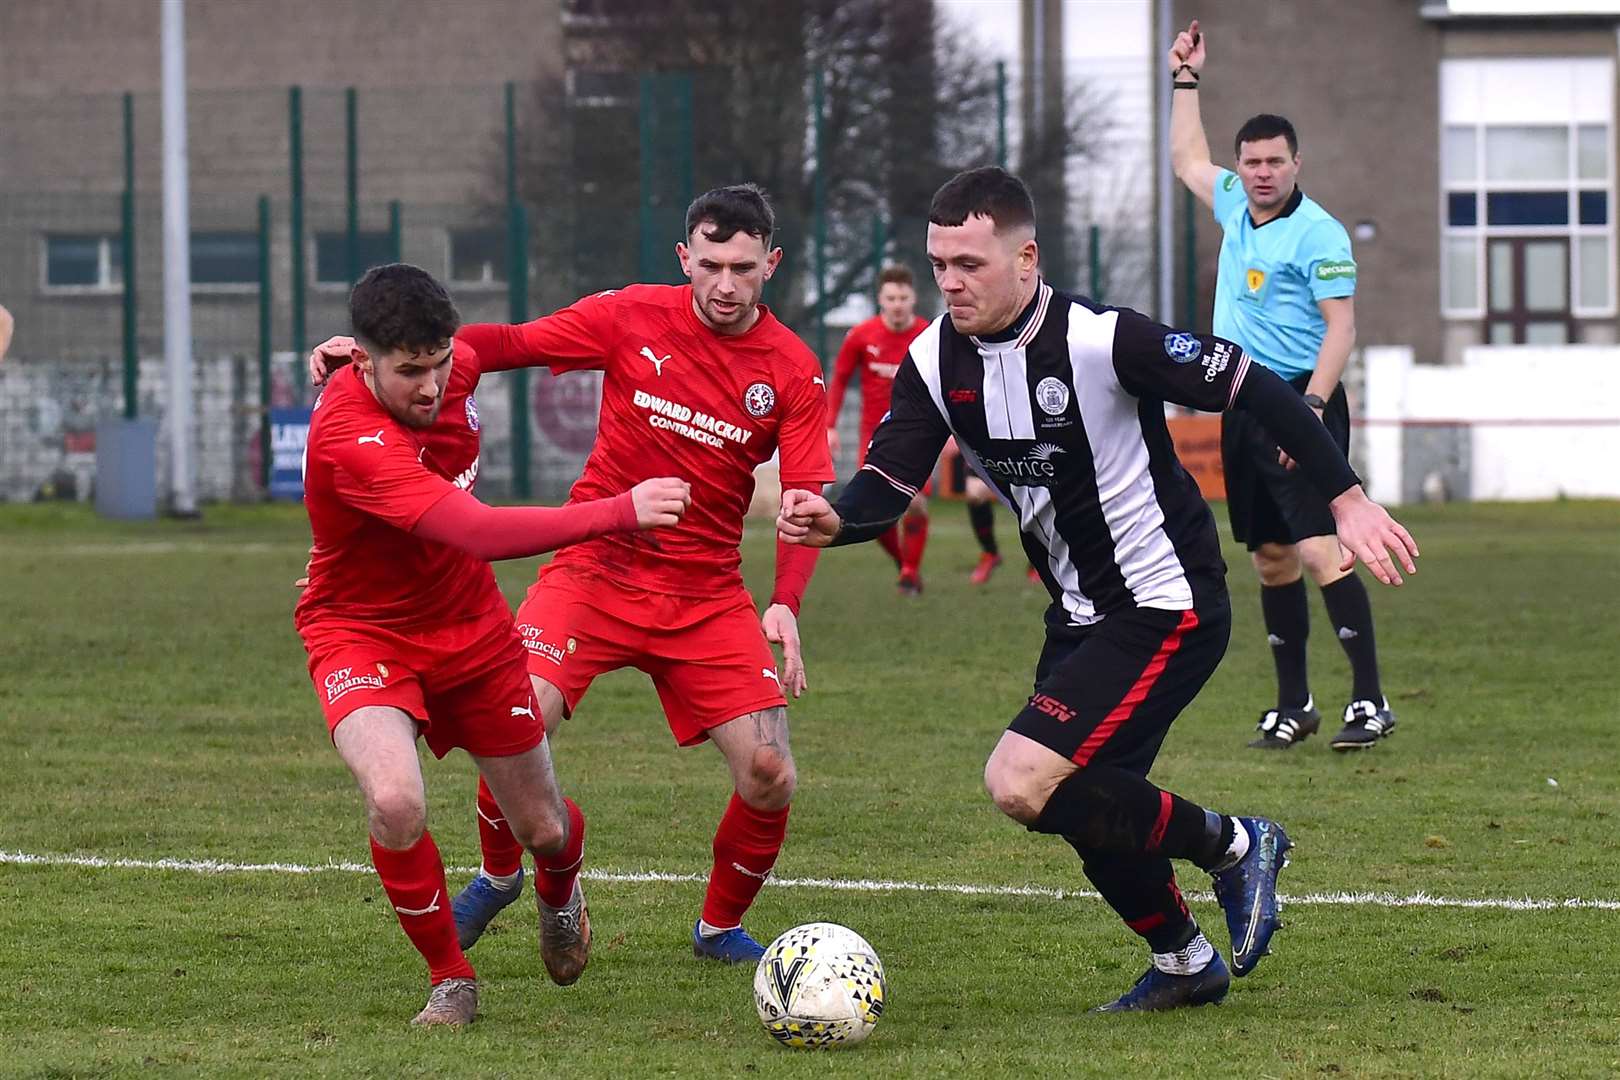 Gordon MacNab takes on Brora duo Tom Kelly and Ali Sutherland in the Dudgeon Park derby. Picture: Mel Roger